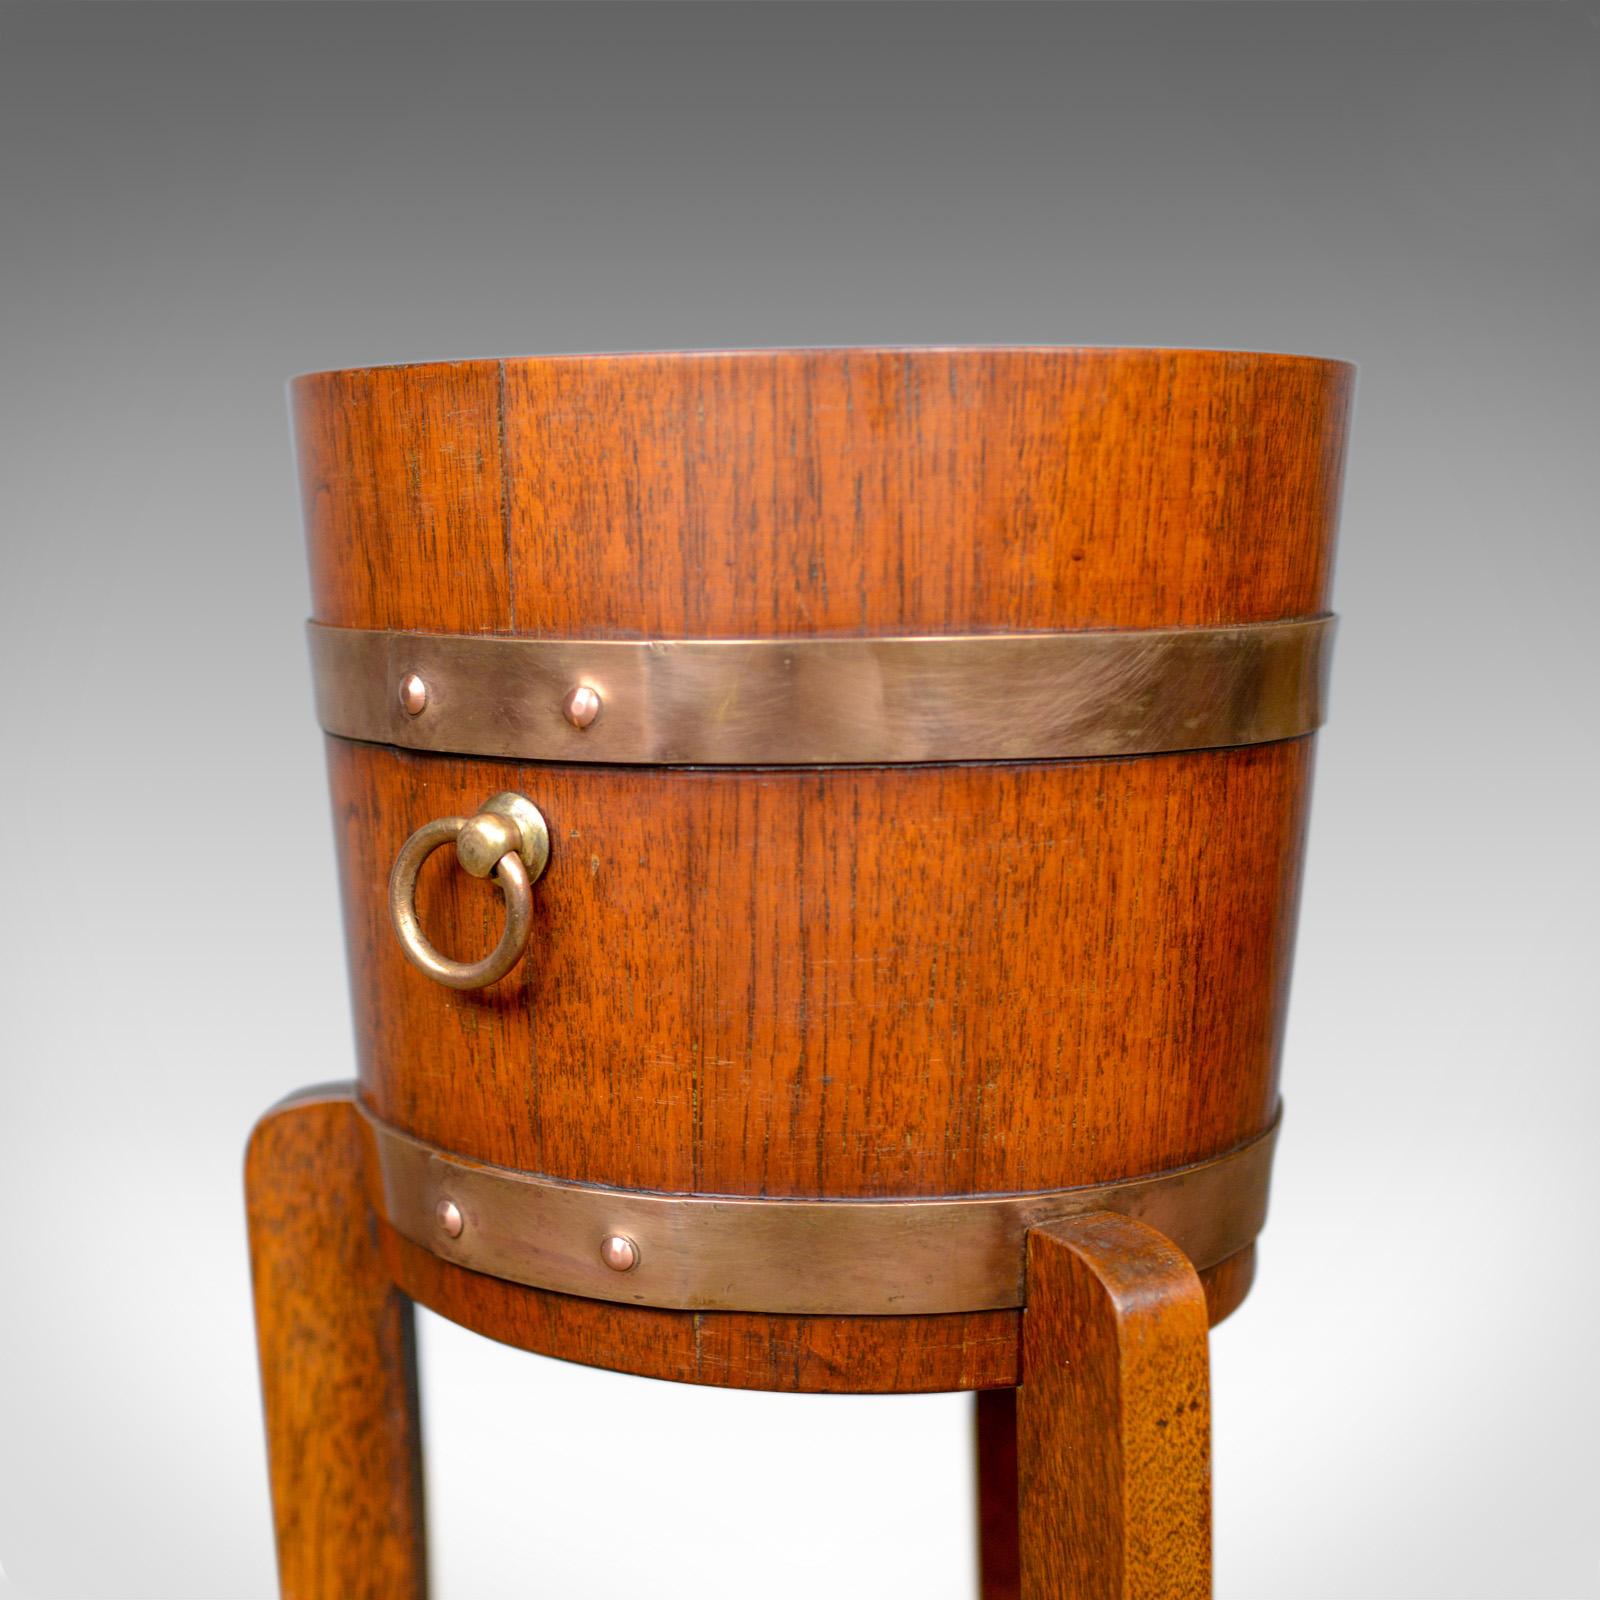 English Antique Jardiniere, Arts & Crafts, Coopered Barrel on Stand, Lister, circa 1900